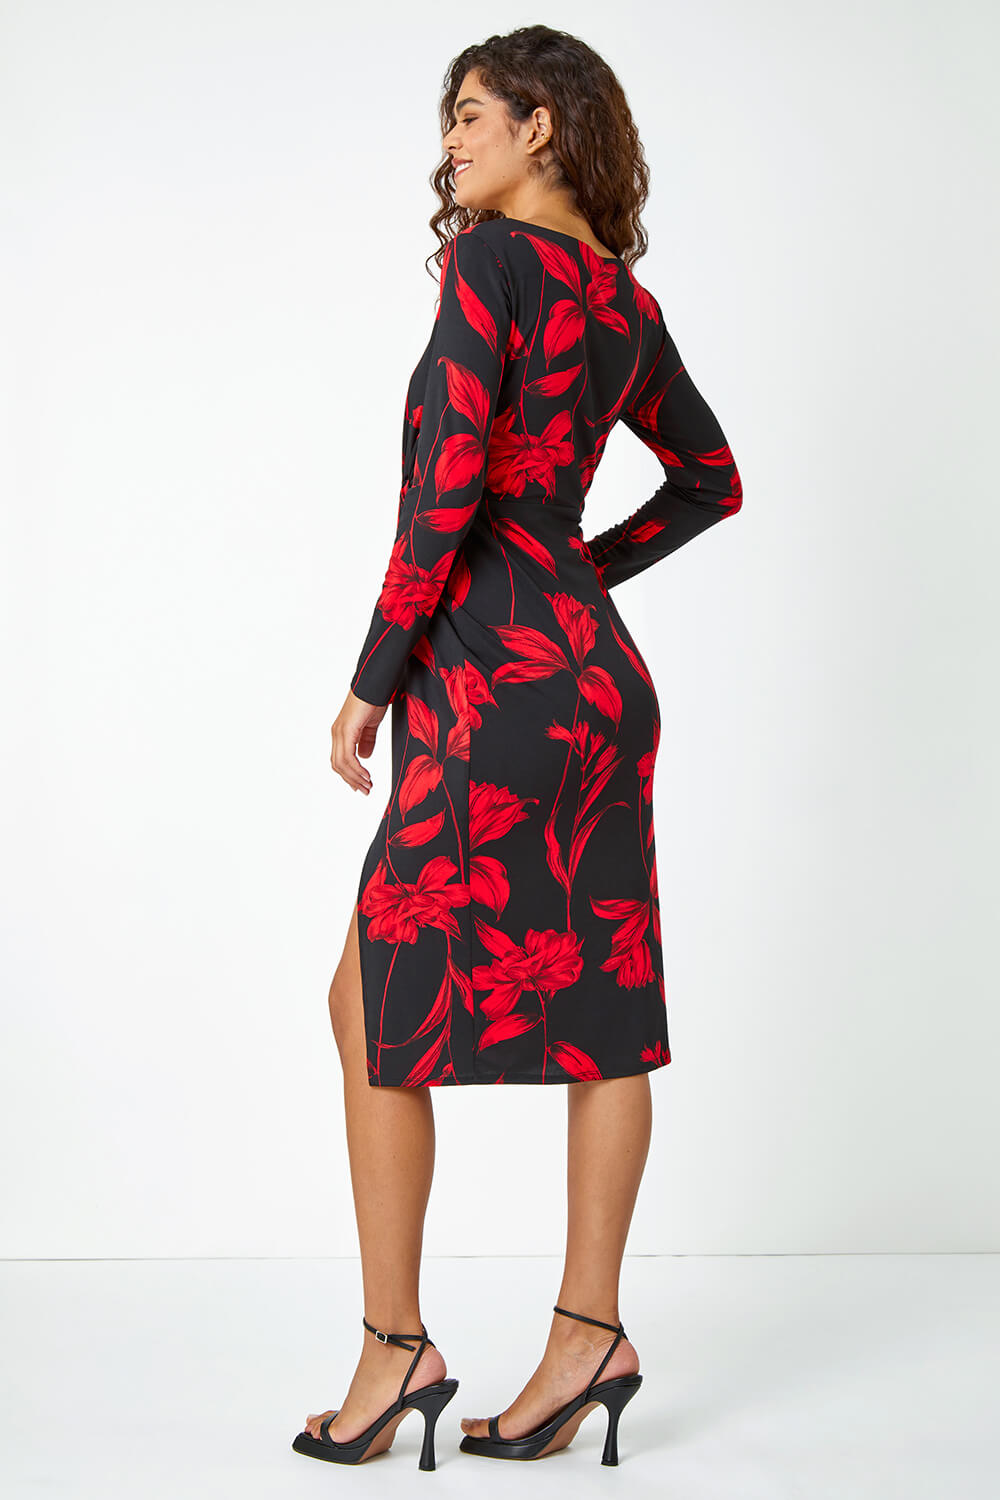 Red Floral Print Twist Detail Stretch Dress, Image 3 of 5